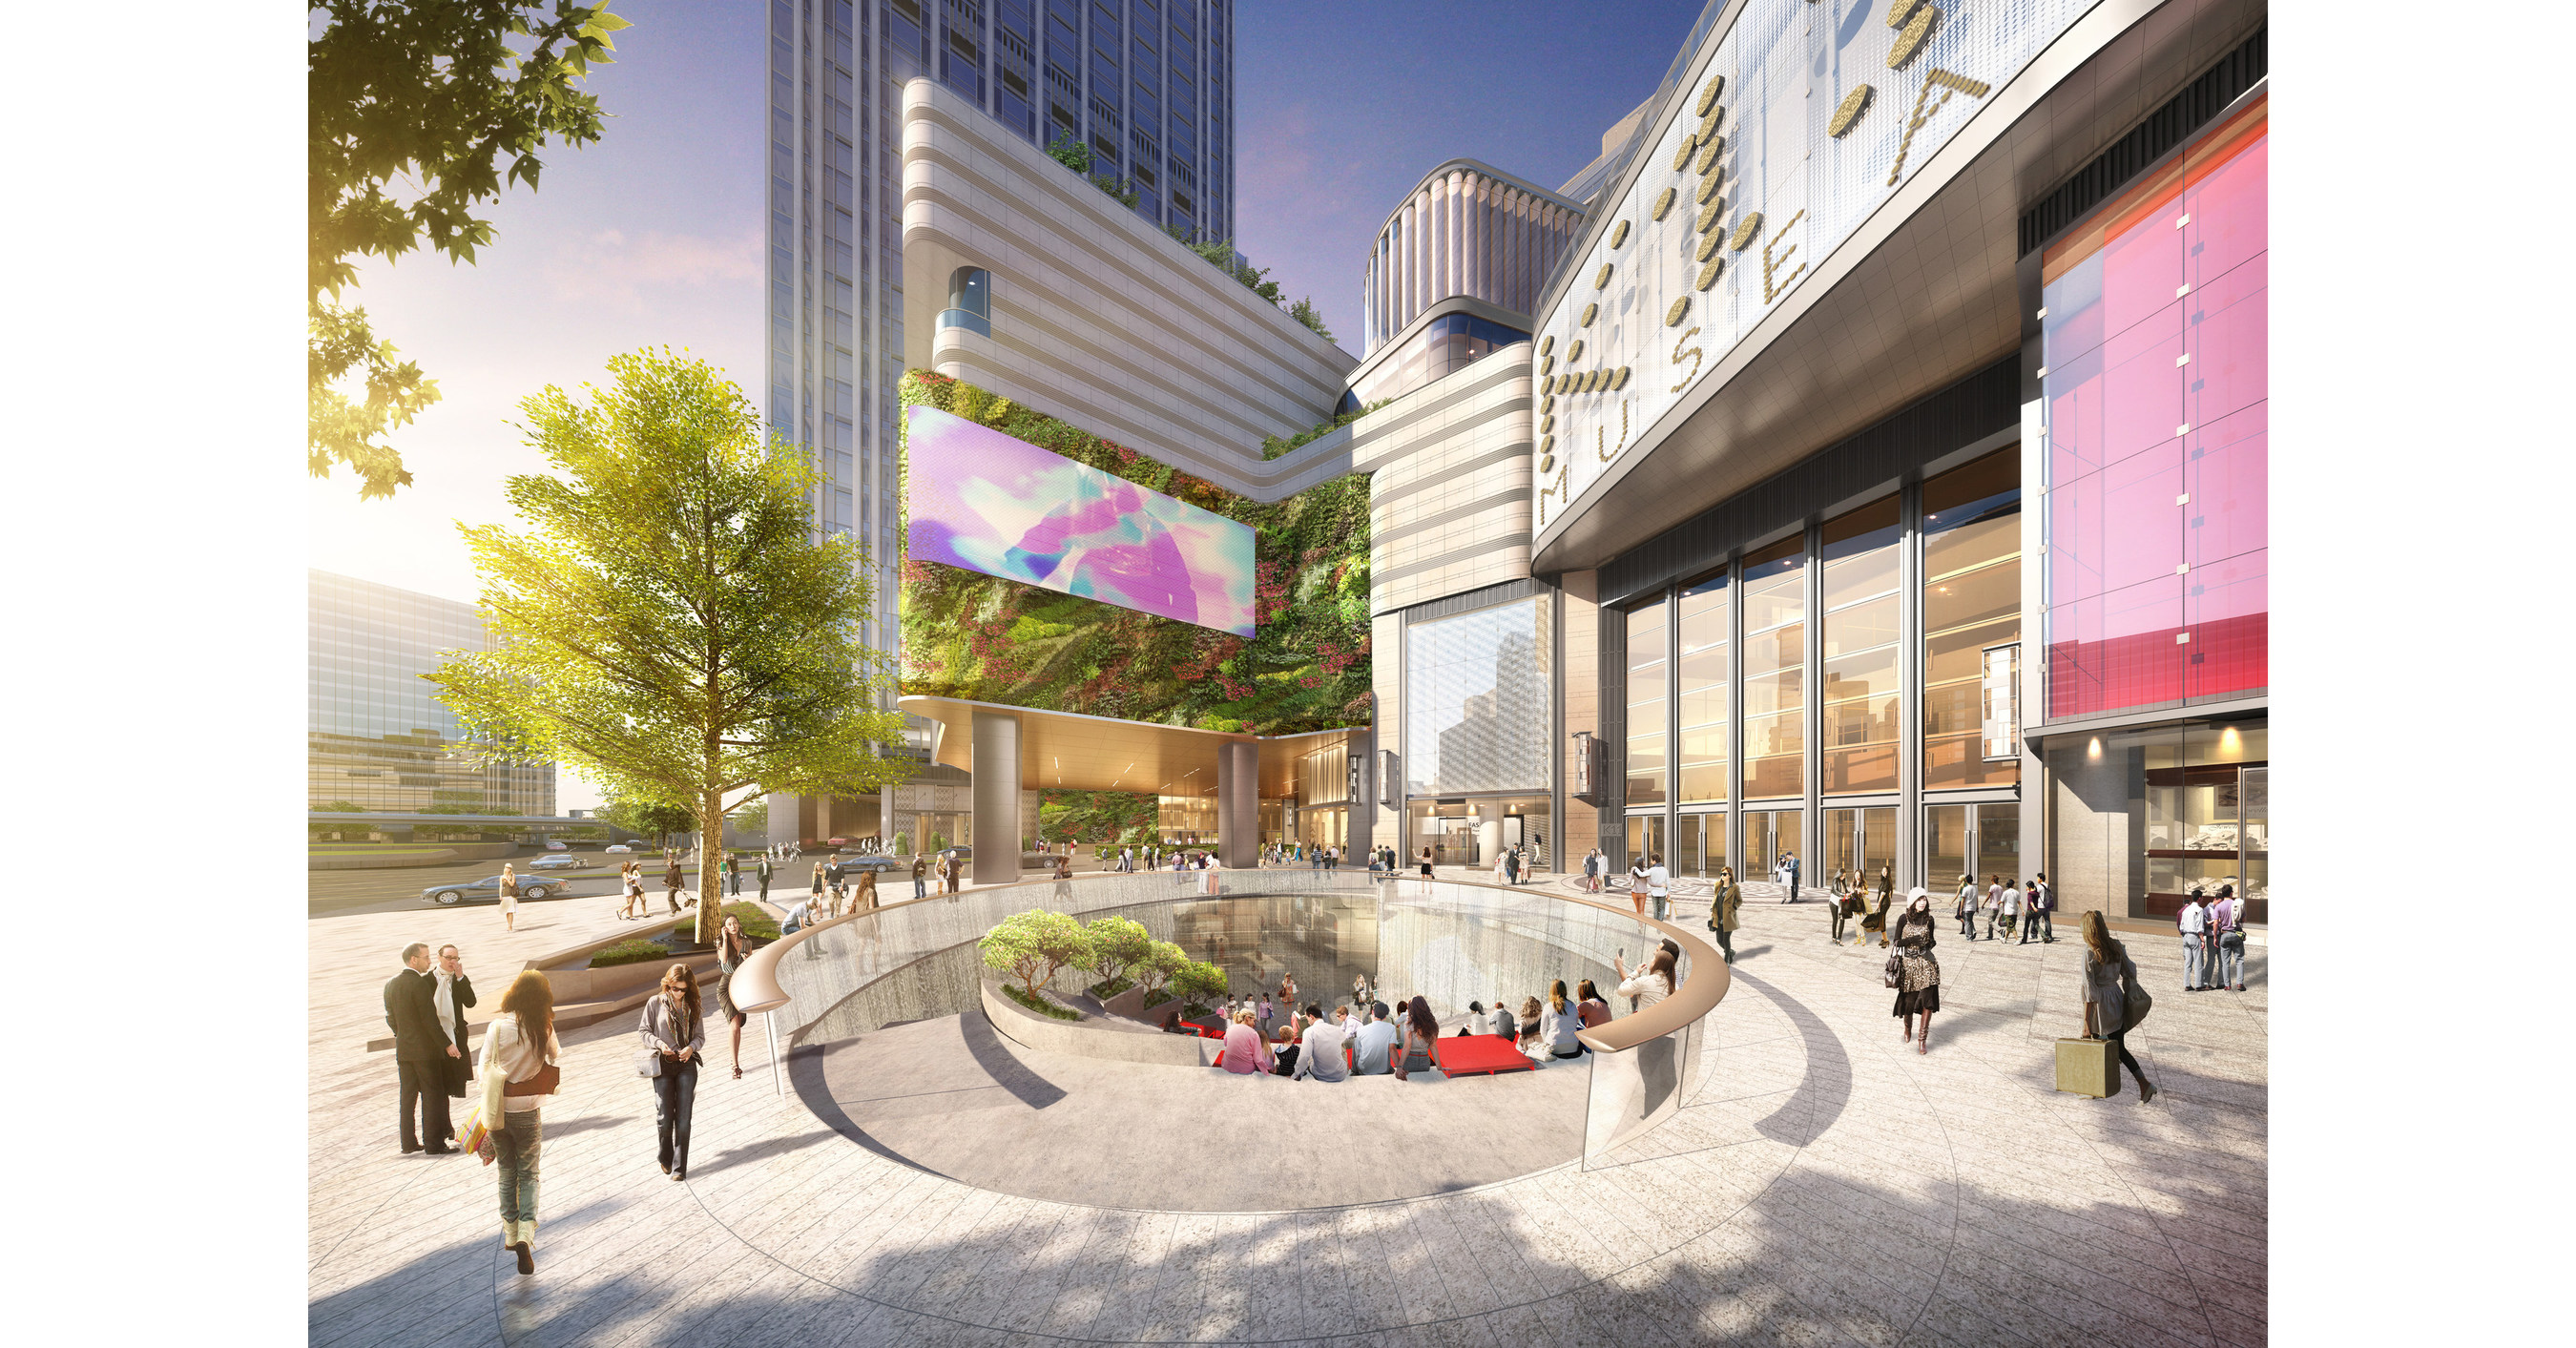 K11 Musea - K11 MUSEA is a new world-class experiential art, culture and  retail landmark to be opened in the heart of Hong Kong's Victoria Dockside  in Q3 2019. The name is